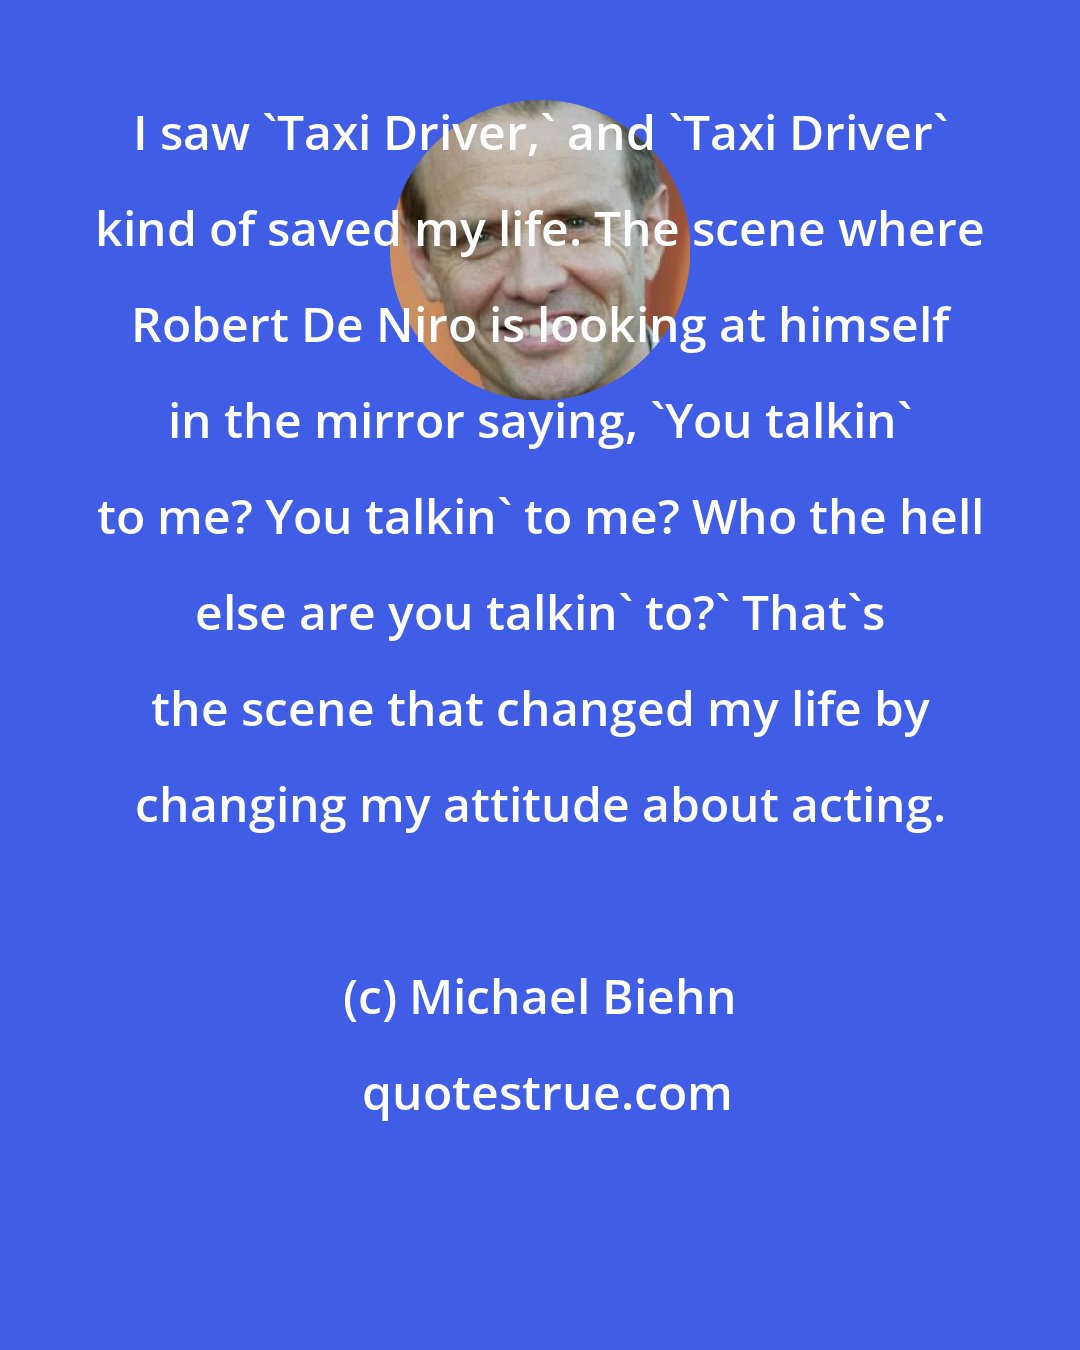 Michael Biehn: I saw 'Taxi Driver,' and 'Taxi Driver' kind of saved my life. The scene where Robert De Niro is looking at himself in the mirror saying, 'You talkin' to me? You talkin' to me? Who the hell else are you talkin' to?' That's the scene that changed my life by changing my attitude about acting.